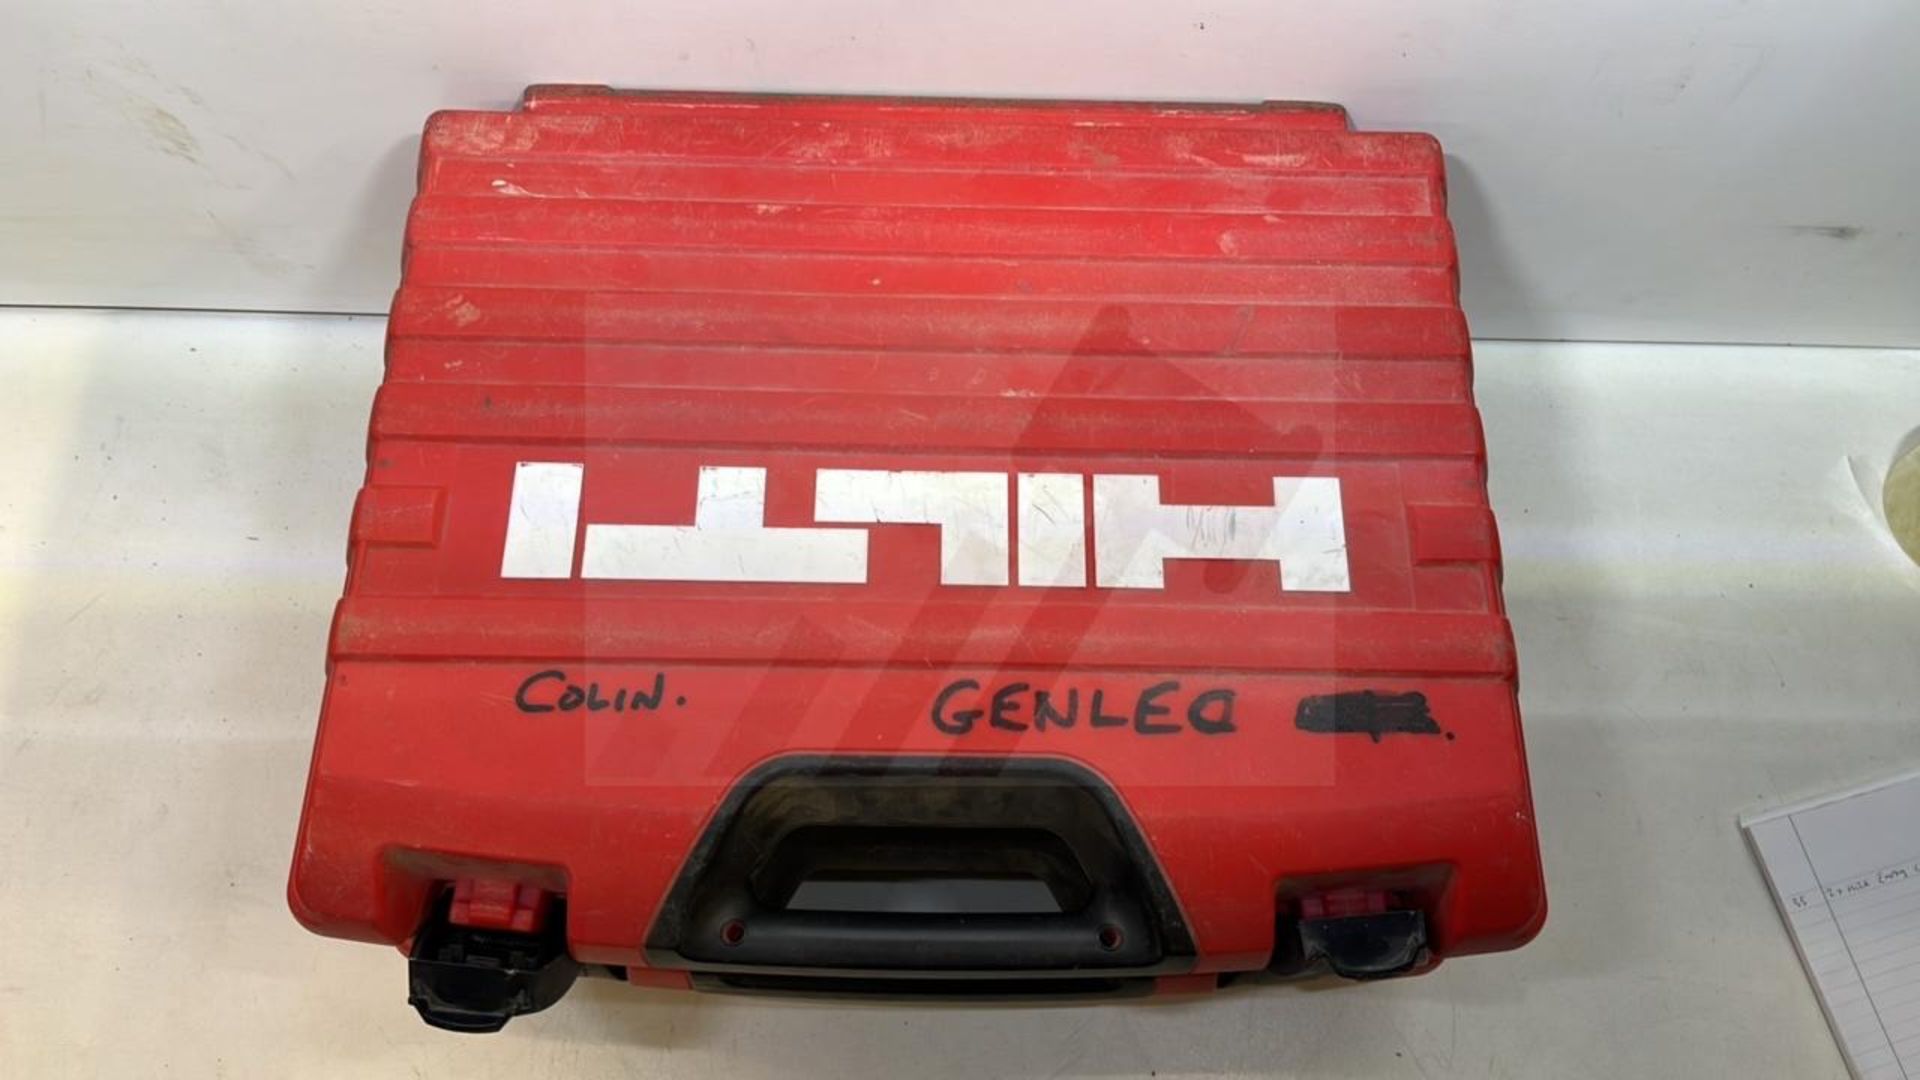 2 x Hilti Empty Drill Cases - As Pictured - Image 2 of 6